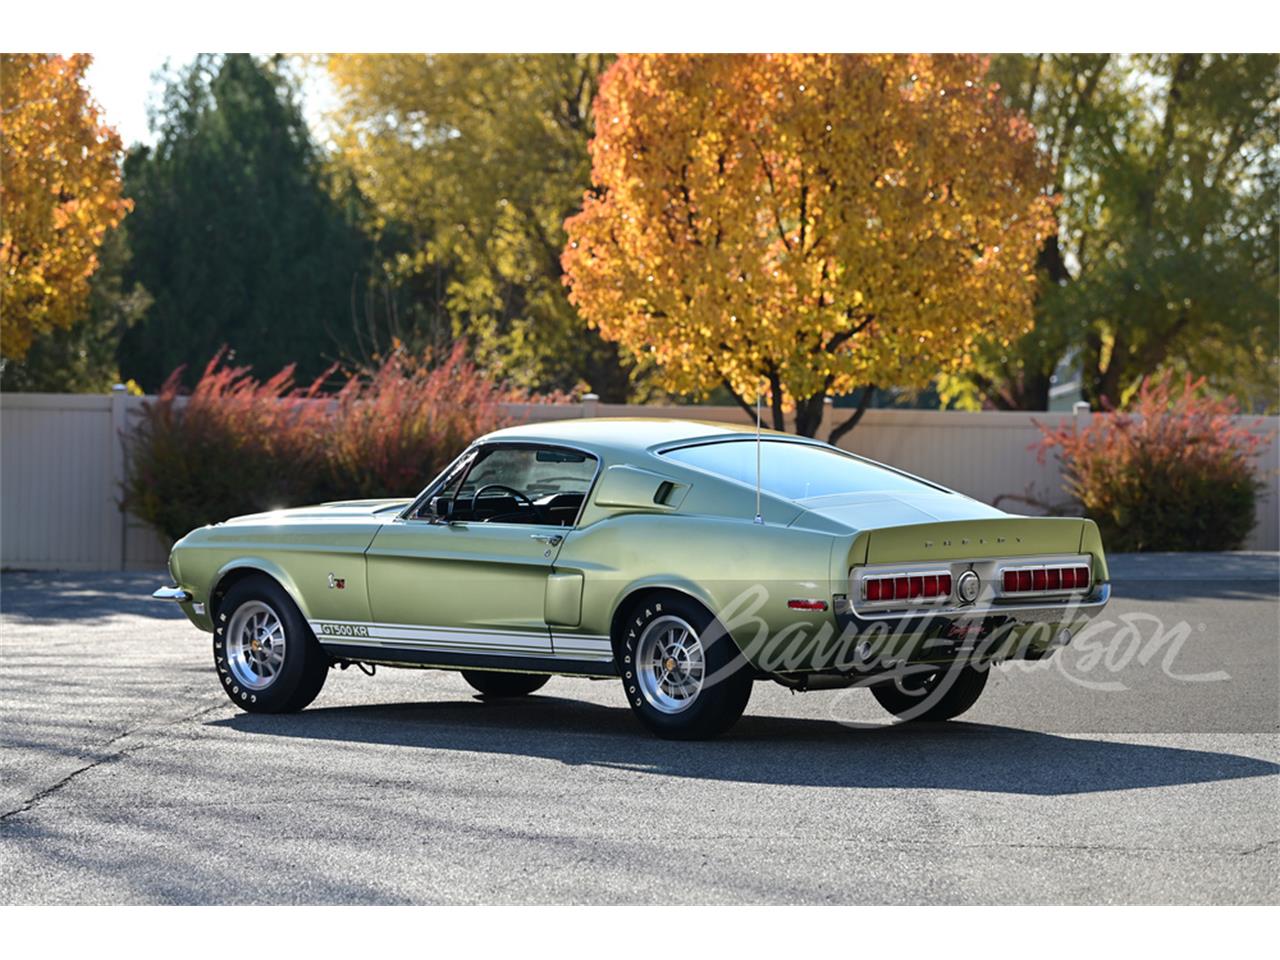 For Sale at Auction: 1968 Shelby GT500 in Scottsdale, Arizona for sale in Scottsdale, AZ